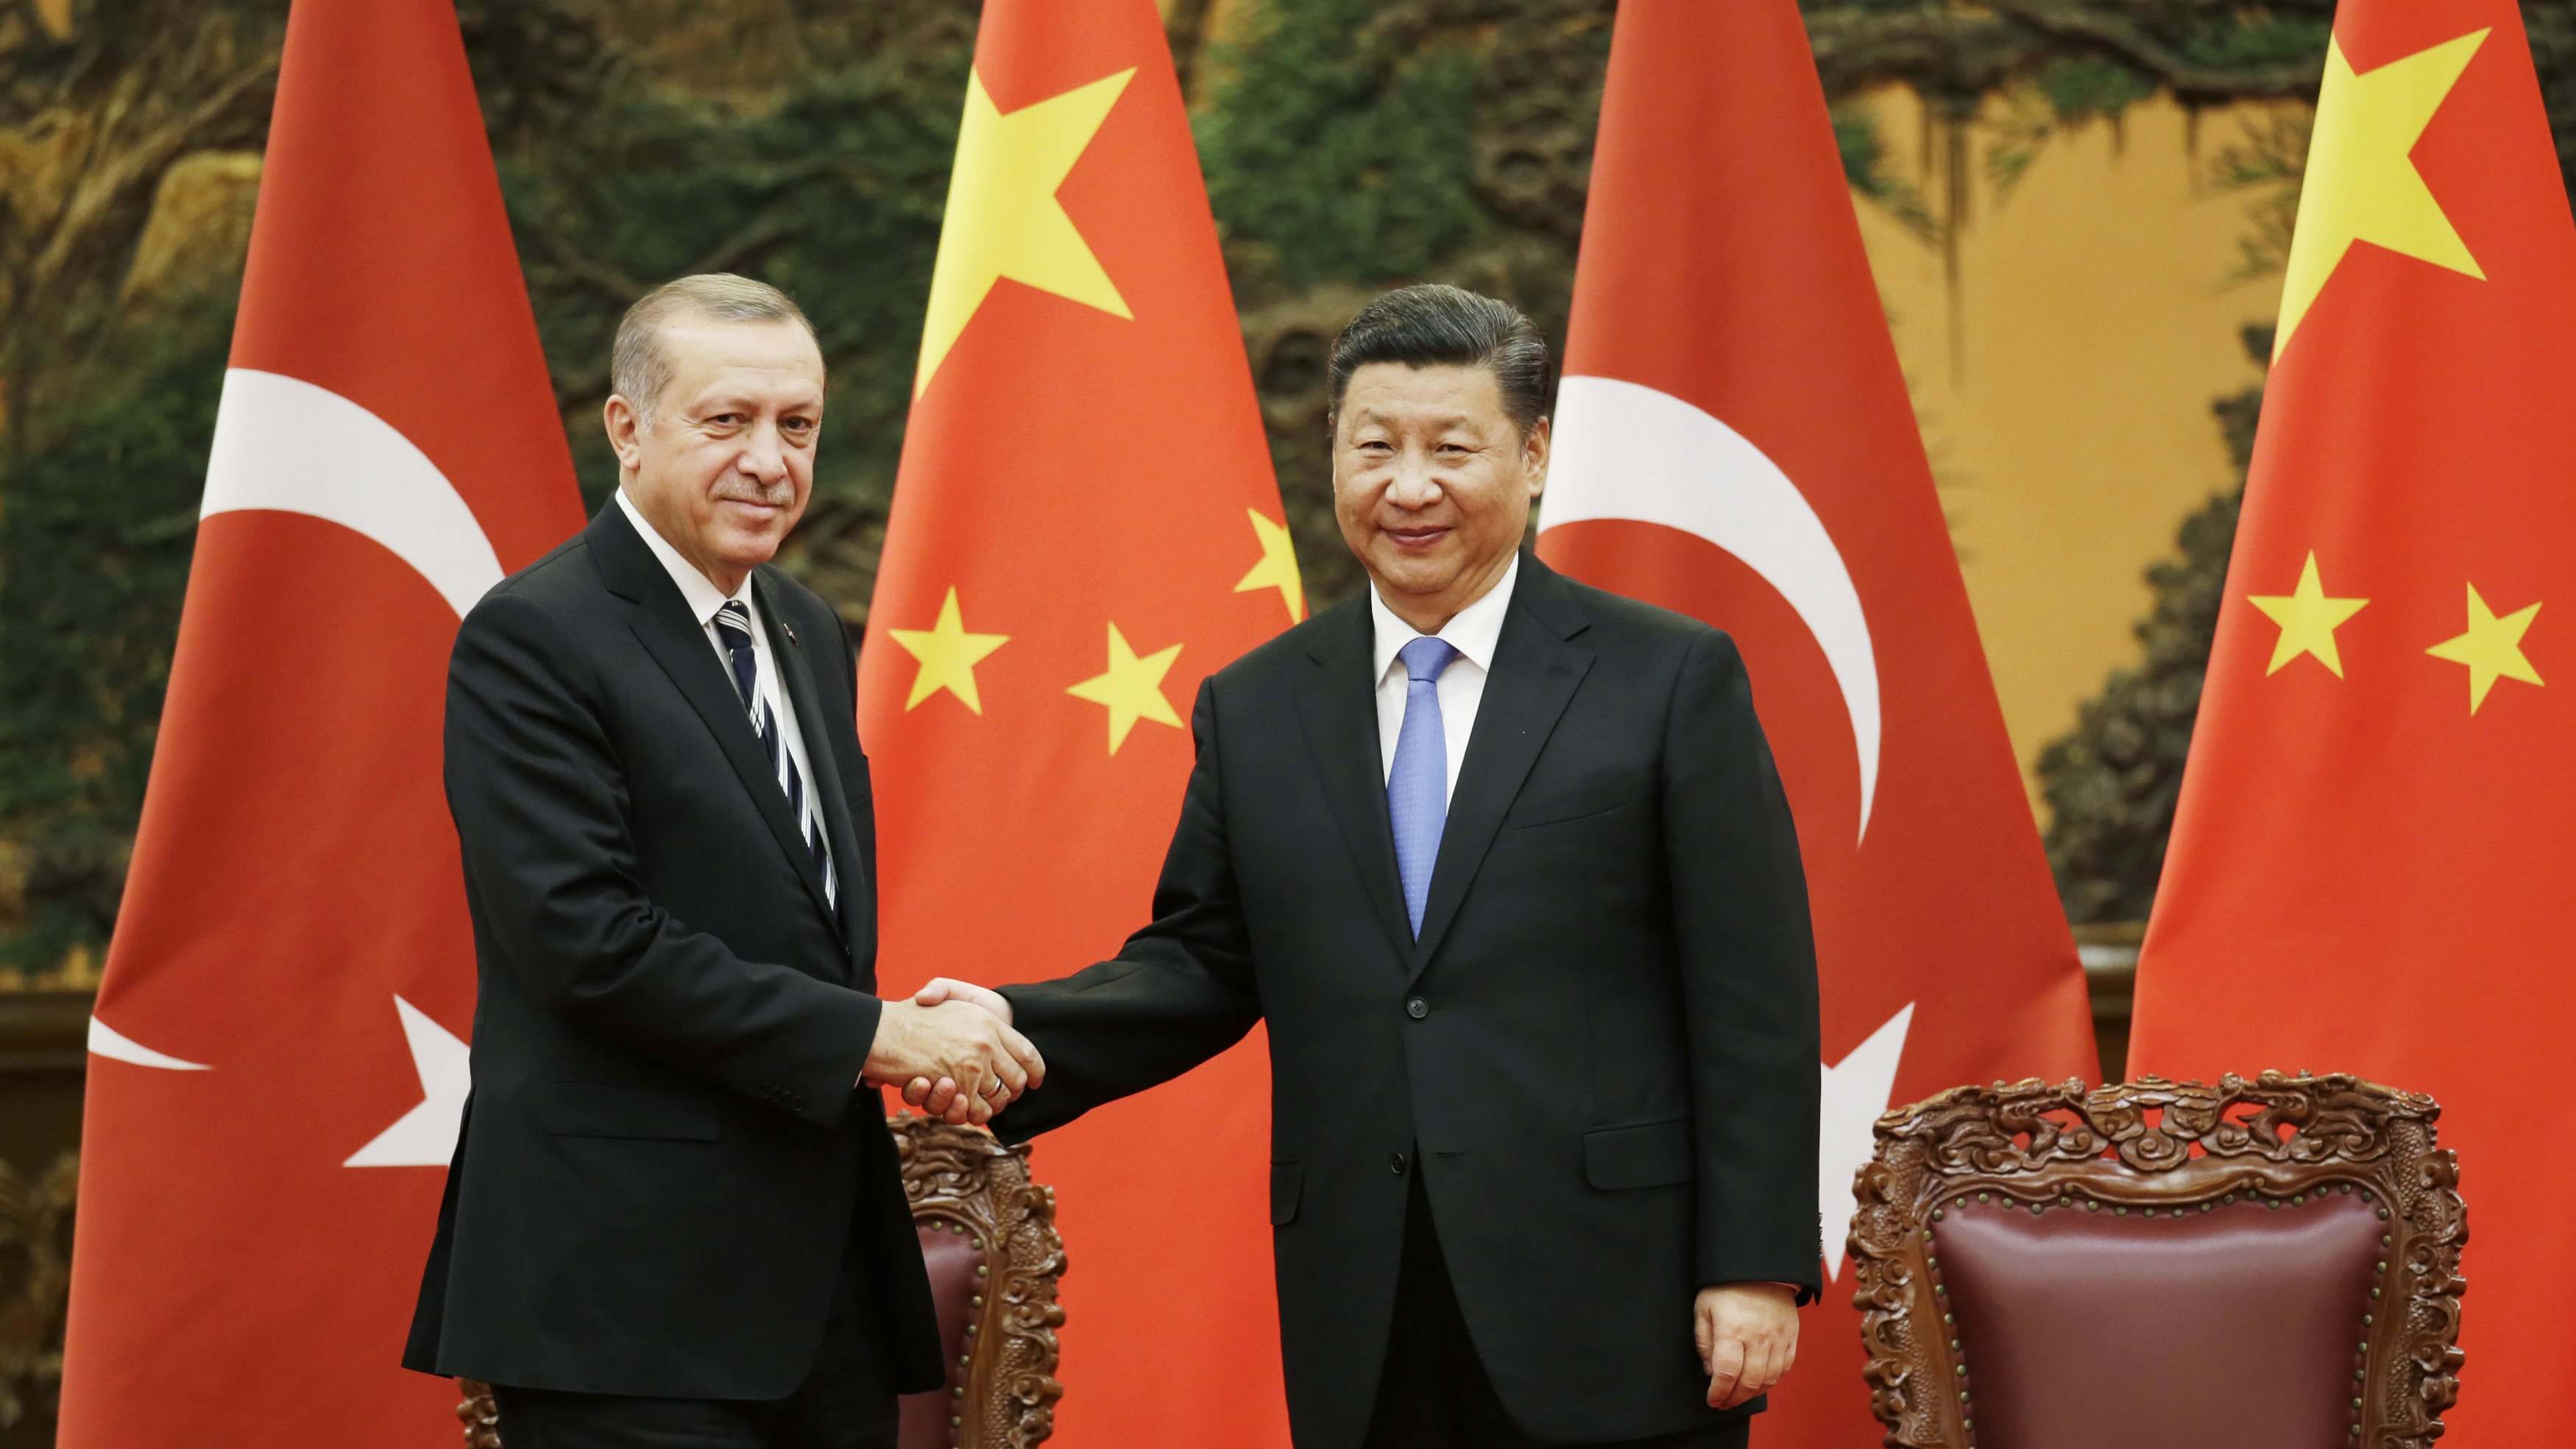 China announces ratification of extradition treaty with Turkey OGPNEWS